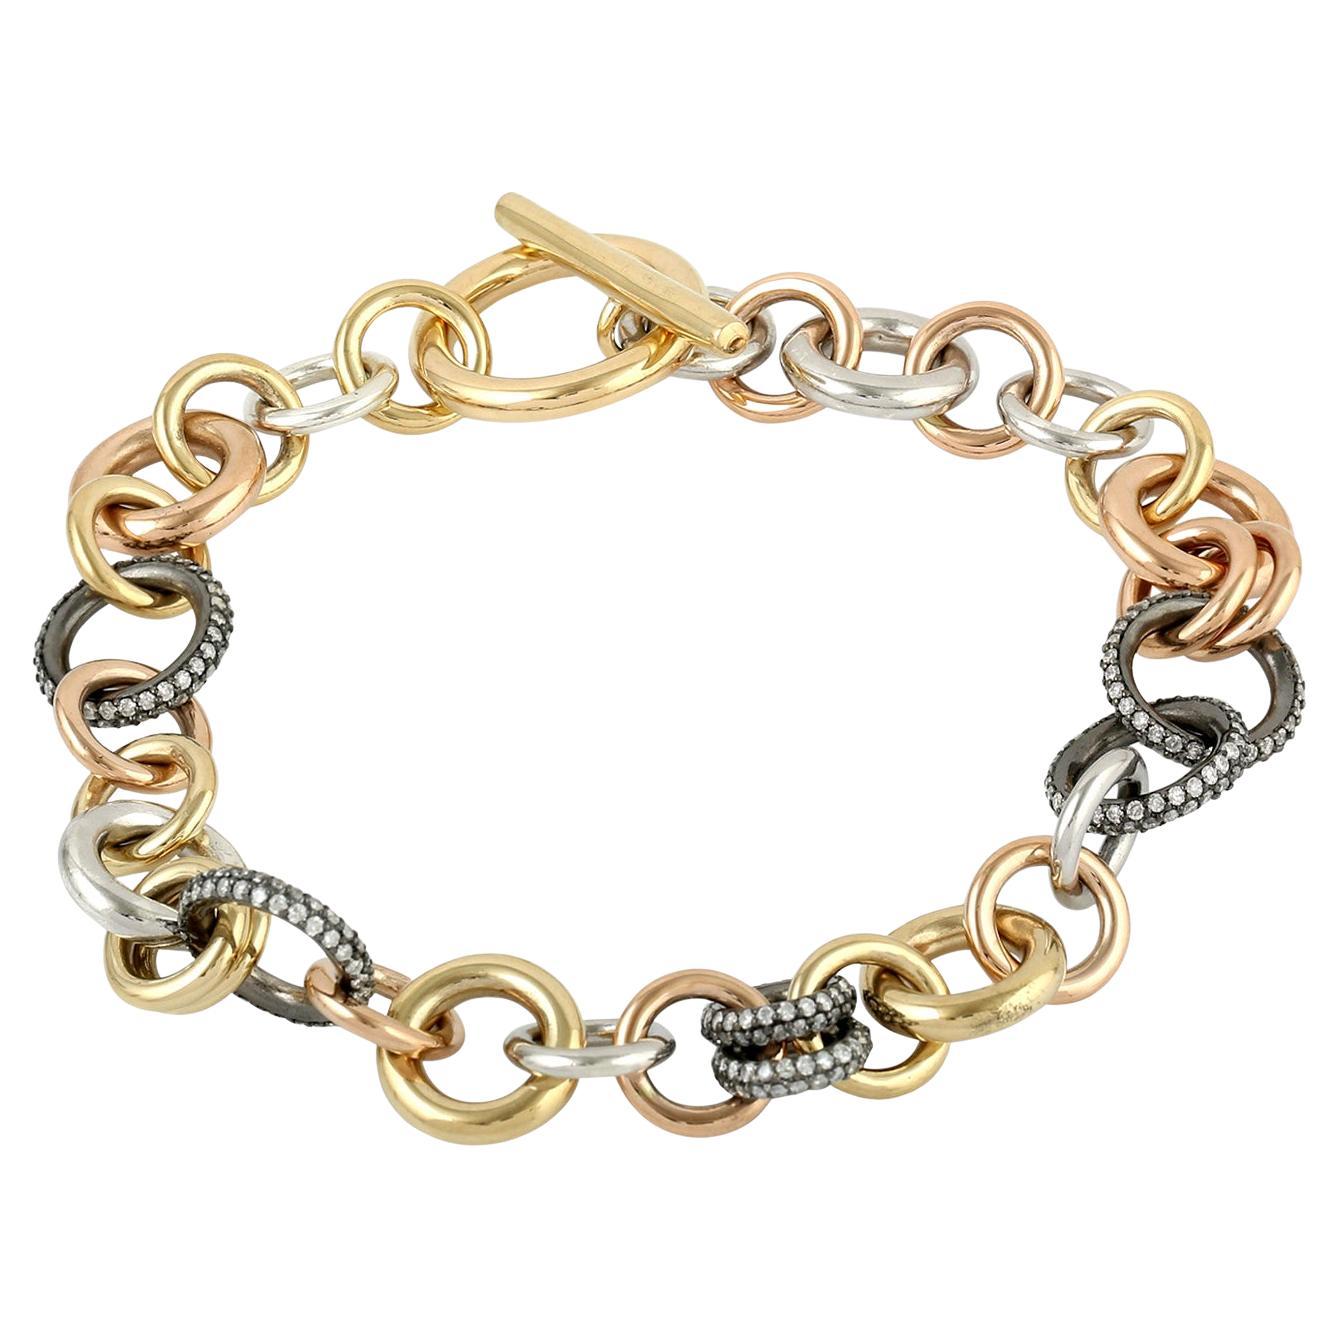 Two Tone Pave Diamond Link Chain Bracelet In 18K Gold & Silver For Sale